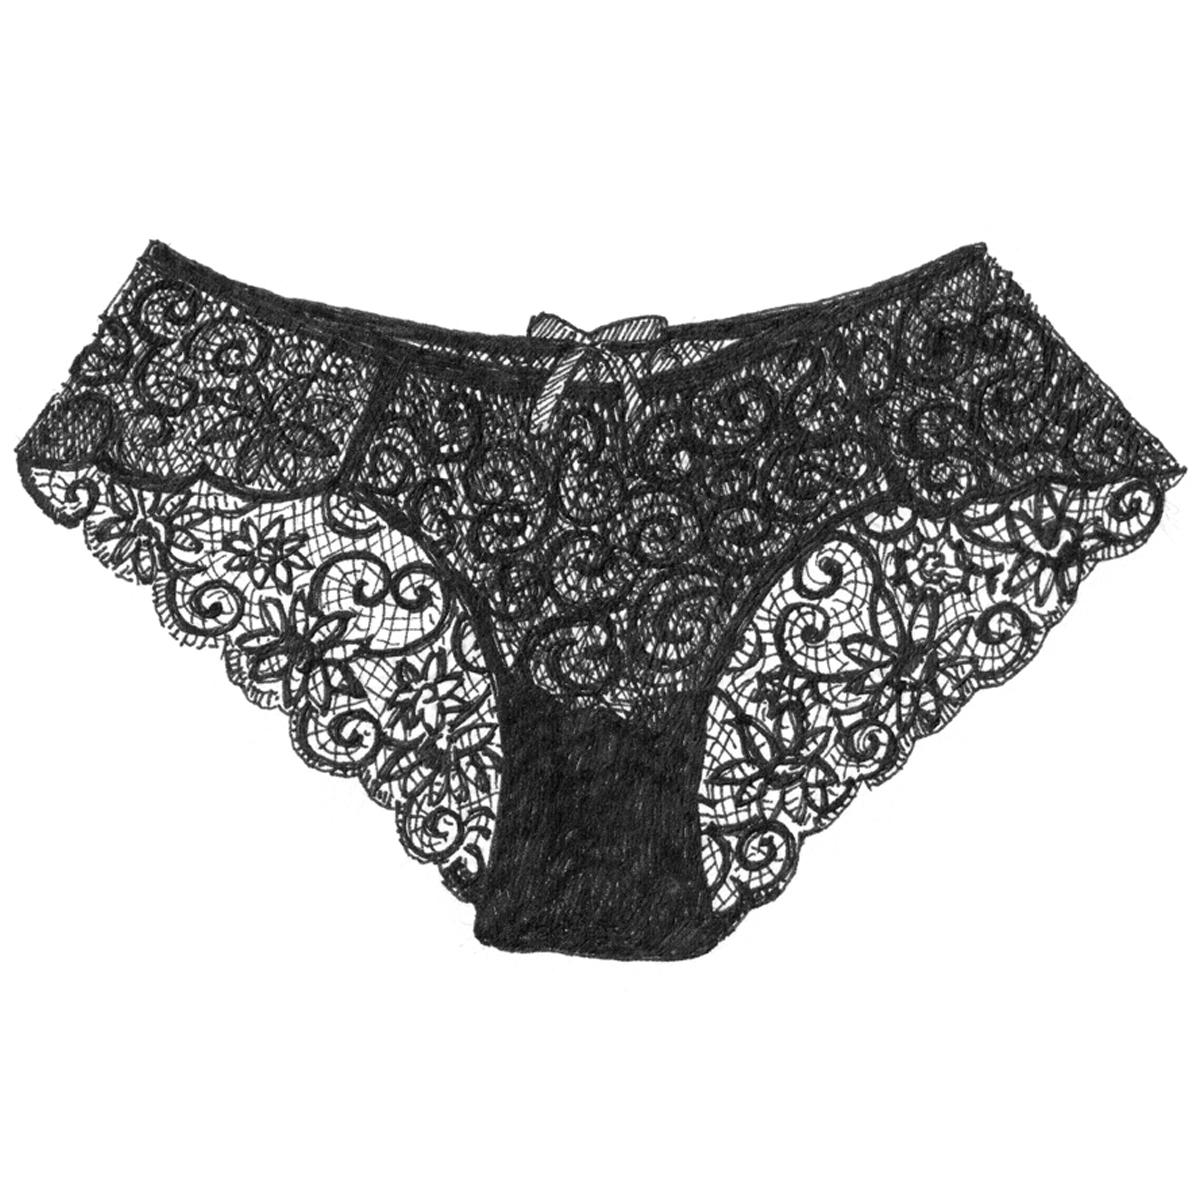 Limited edition print from pen and ink drawing of a pair of lacy knickers